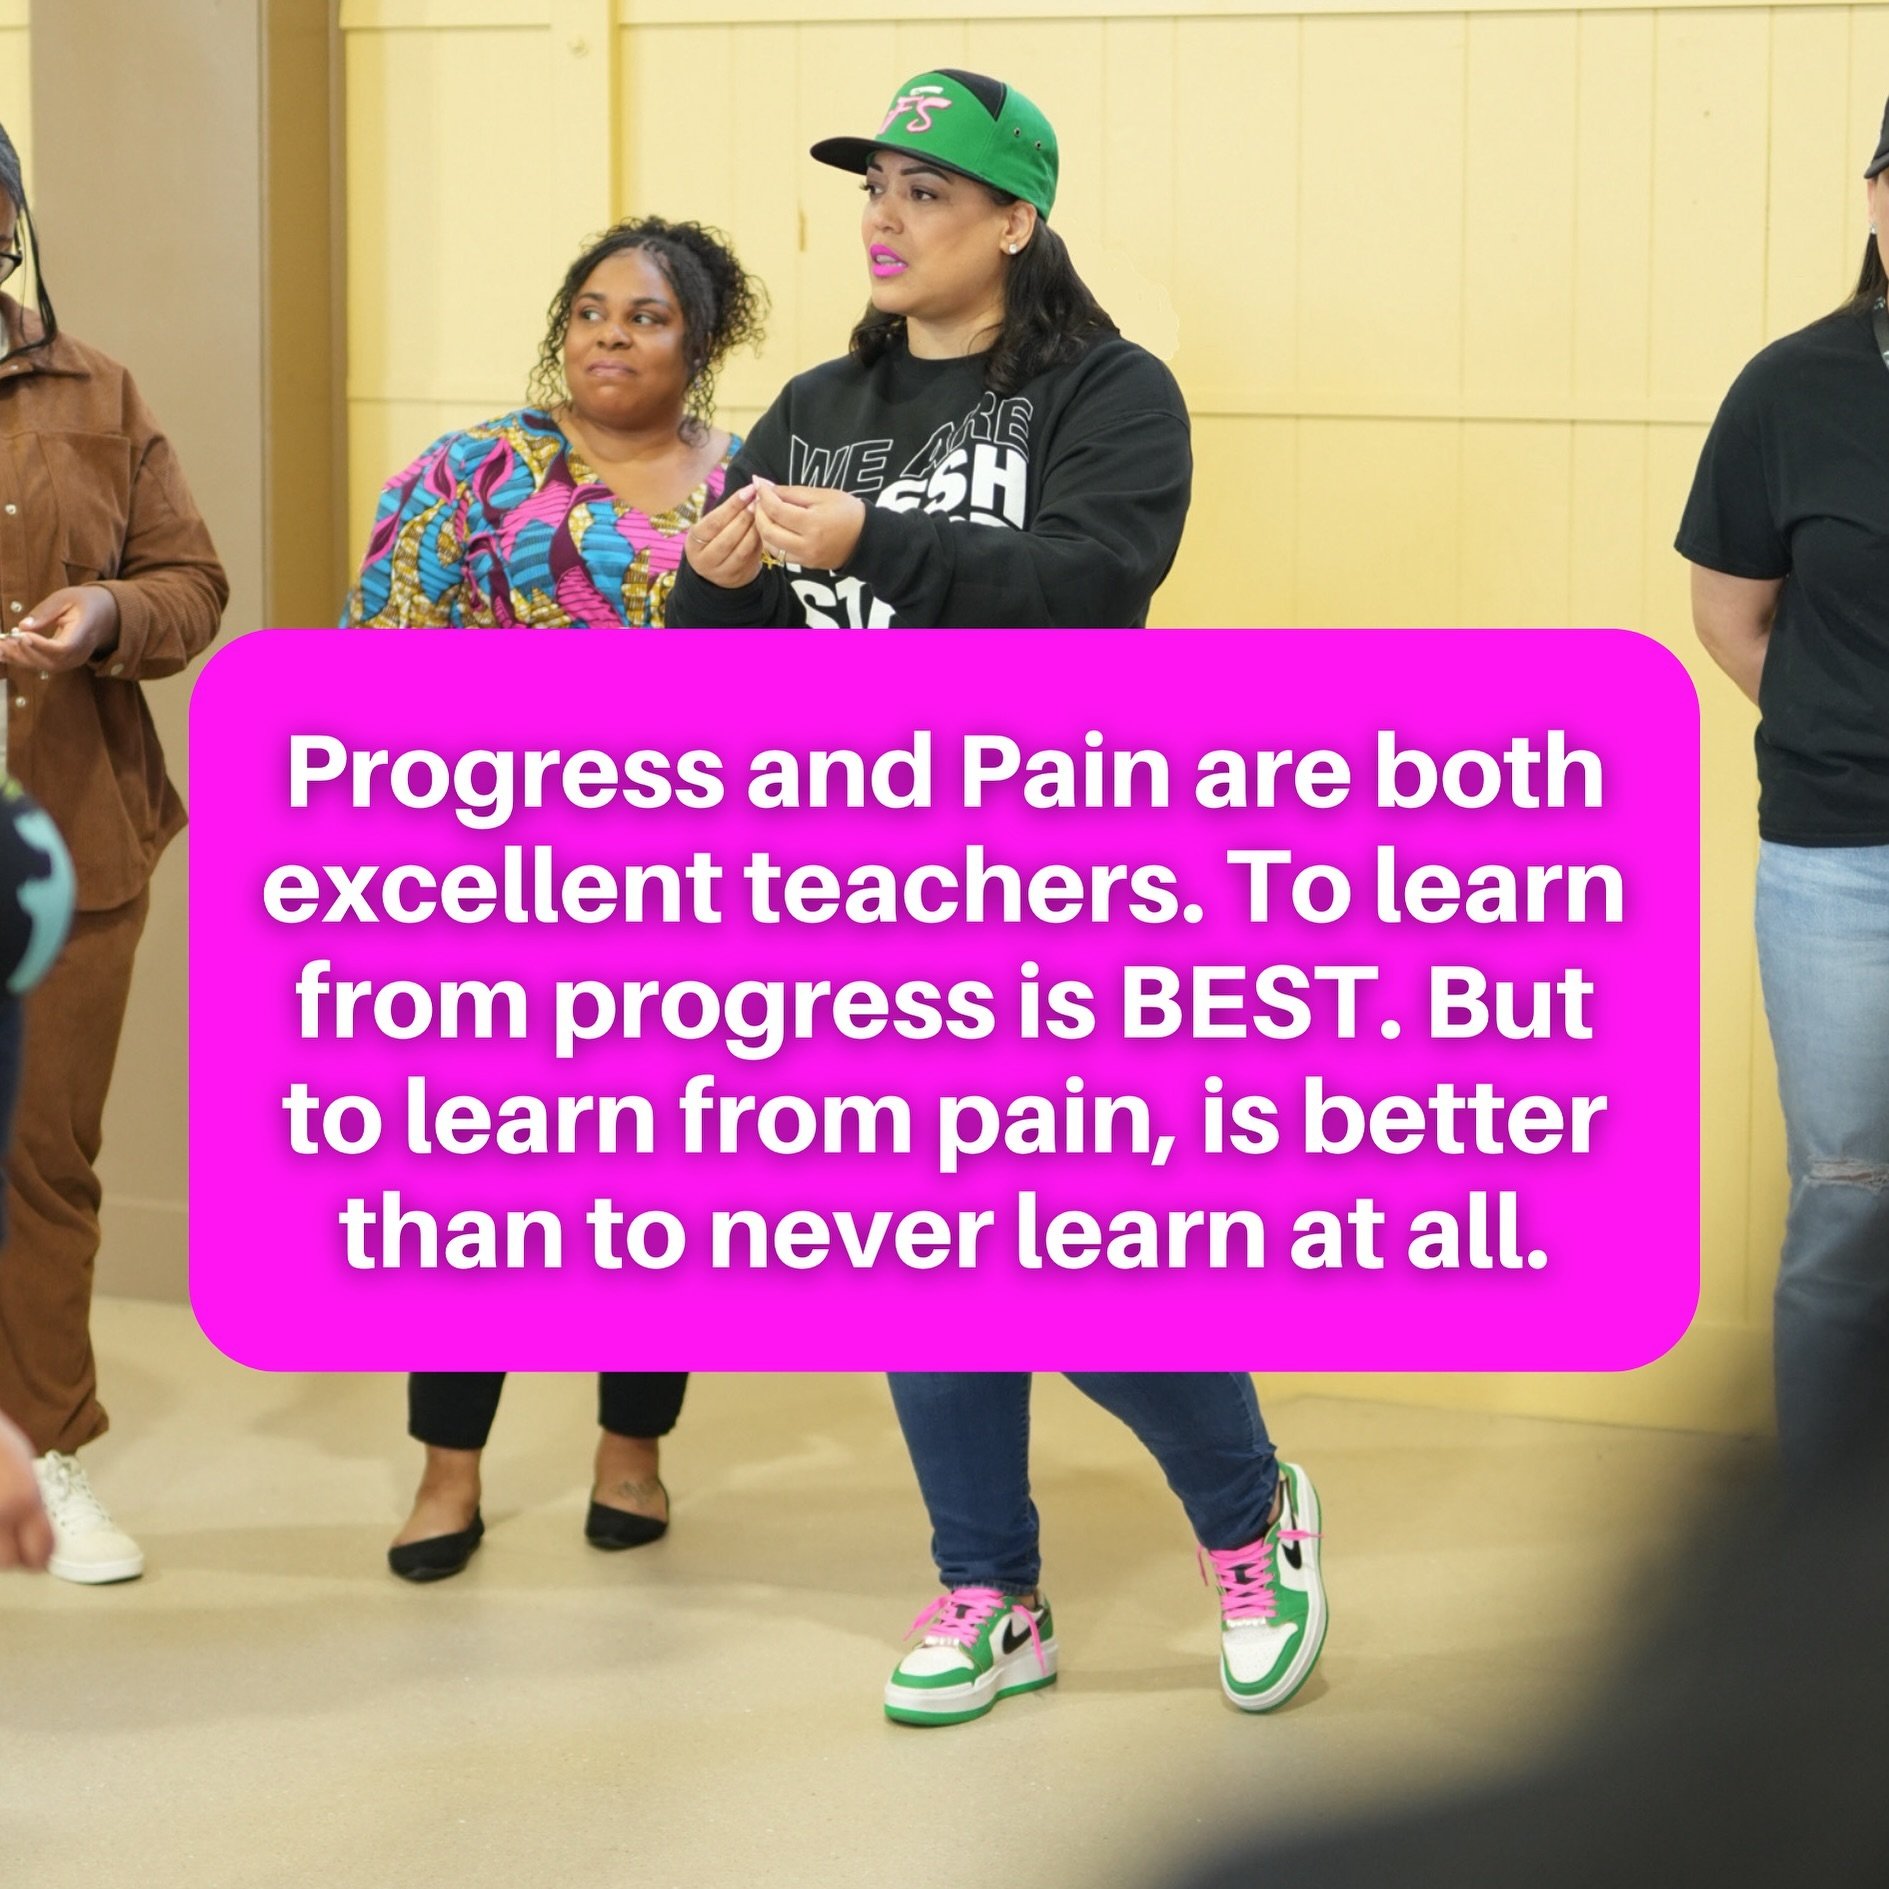 💗 Progress and Pain are both excellent teachers. To learn from progress is BEST. But to learn from pain, is better than to never learn at all. #lifelessons #purposedrivenlife